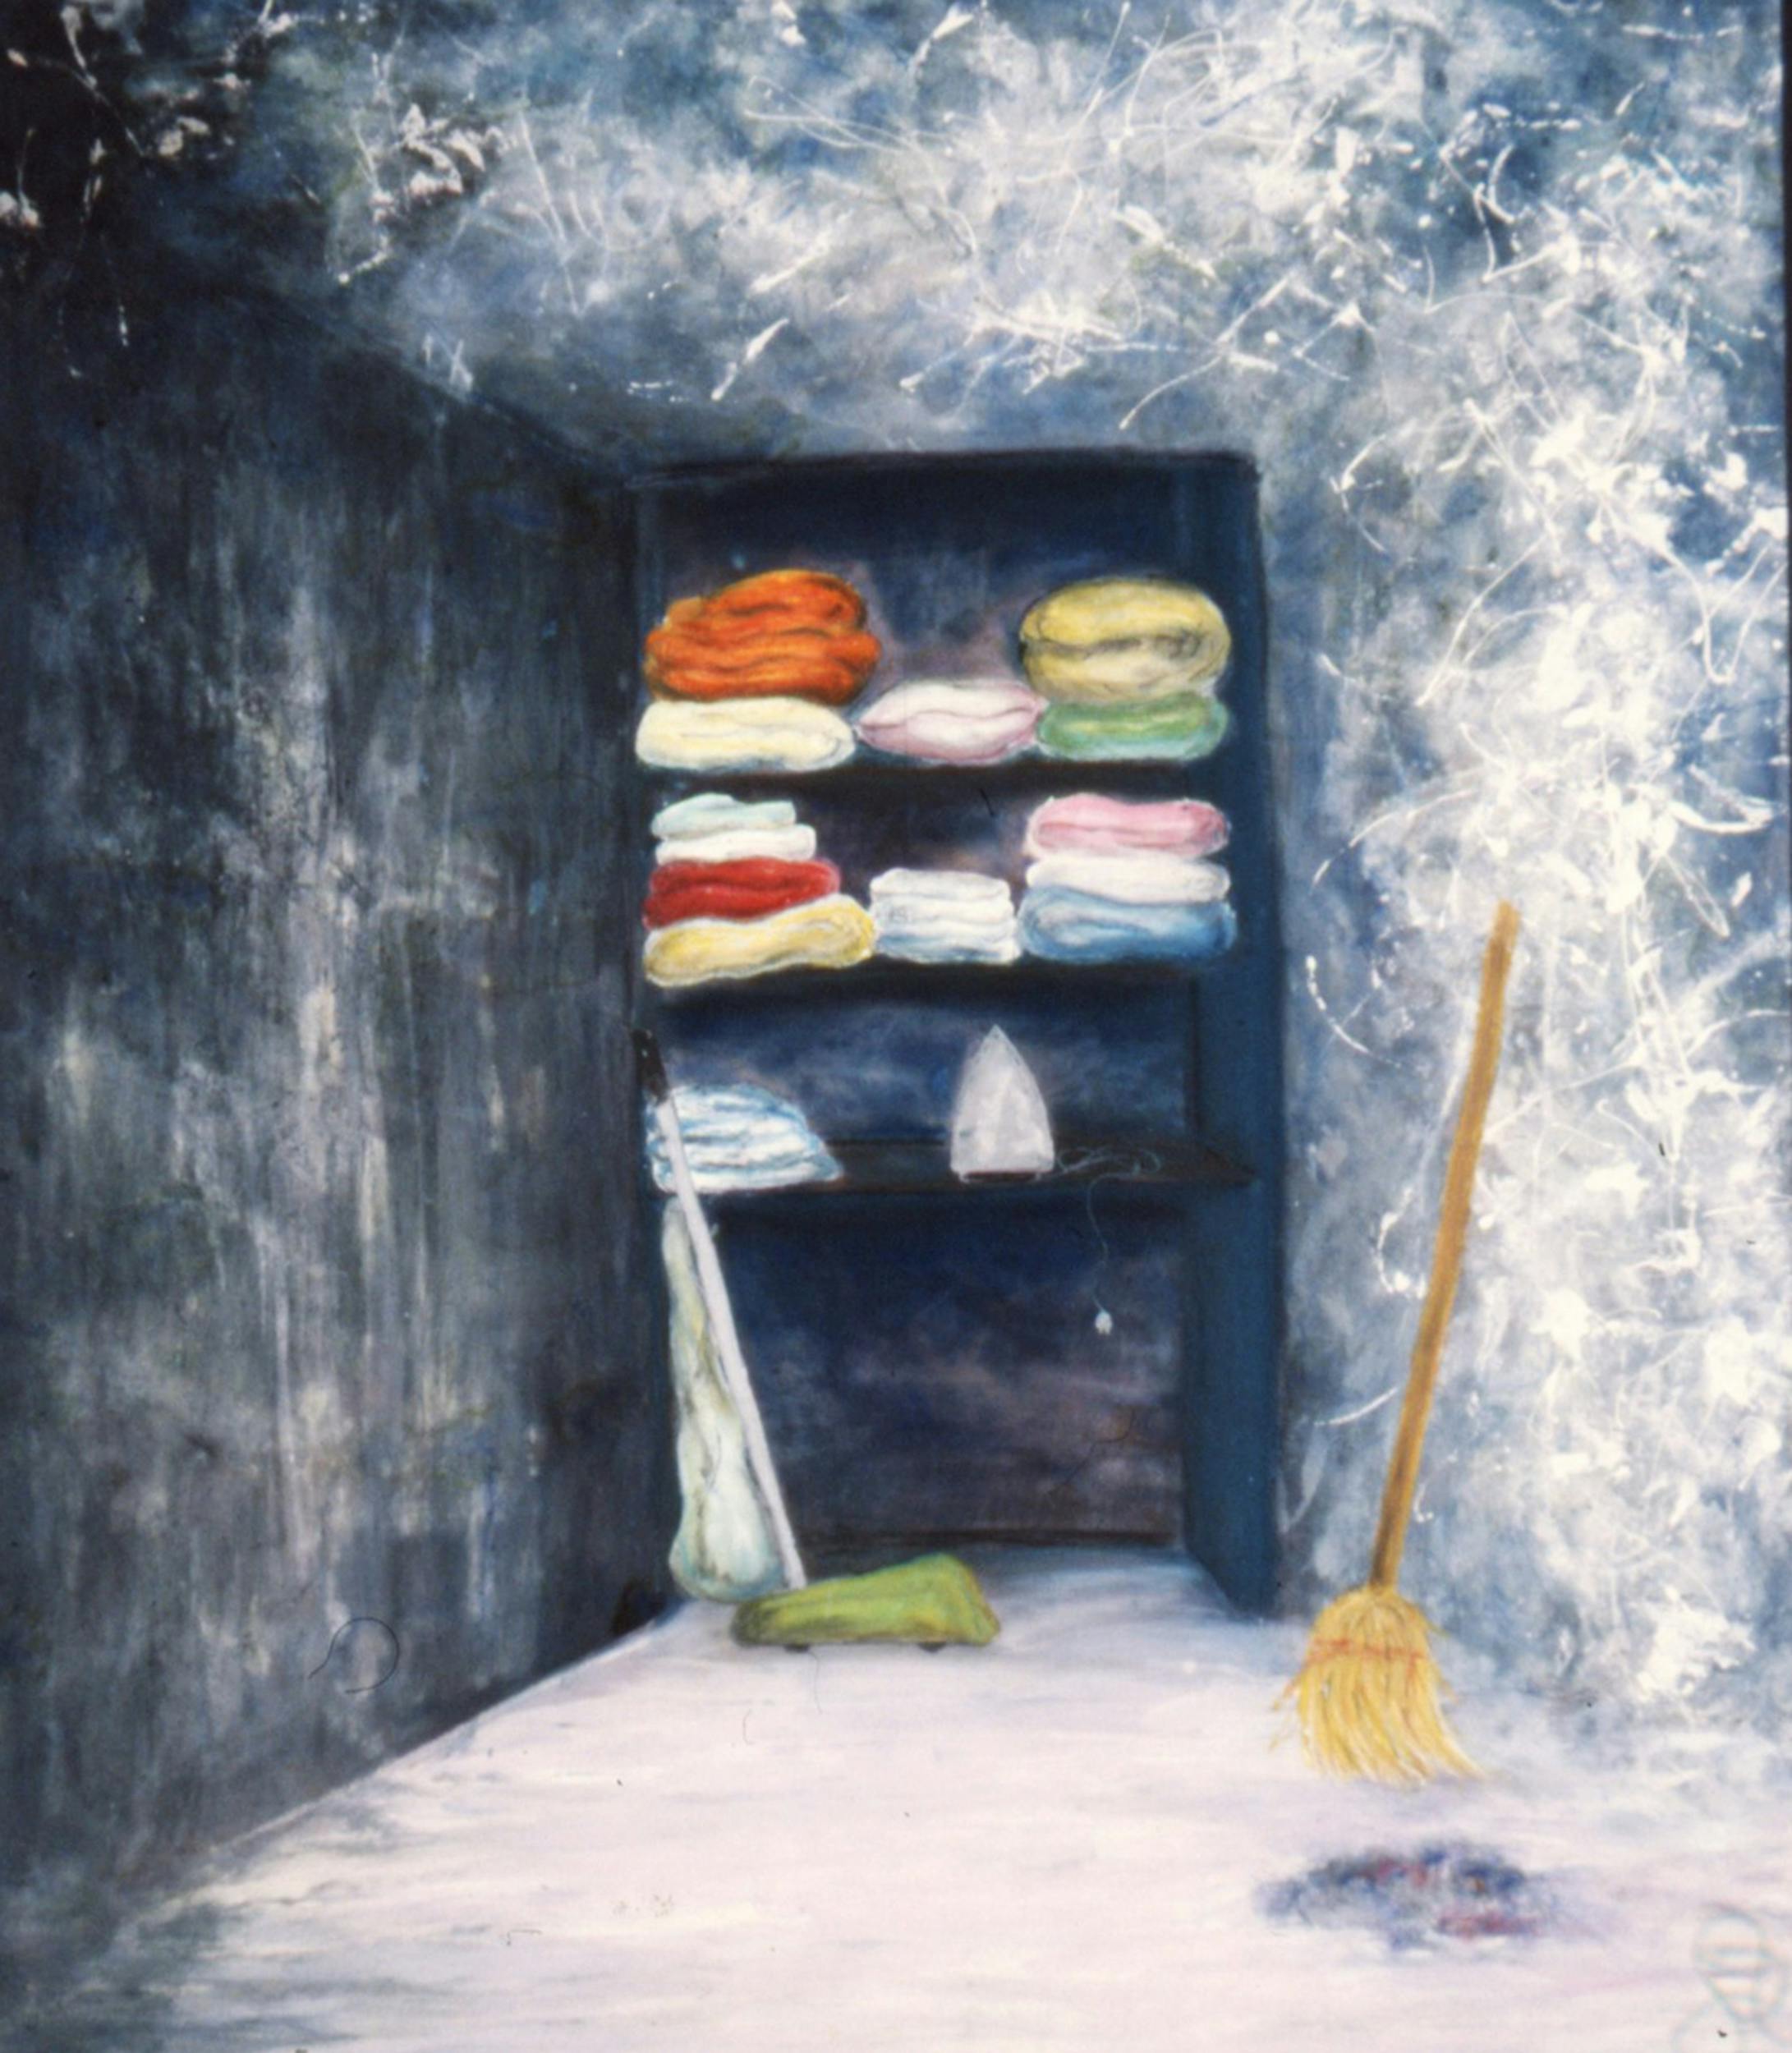 A gestural painting depicting a shelf with colourful piles of folded clothes and an unplugged iron. To the right a broom leans against a wall. 